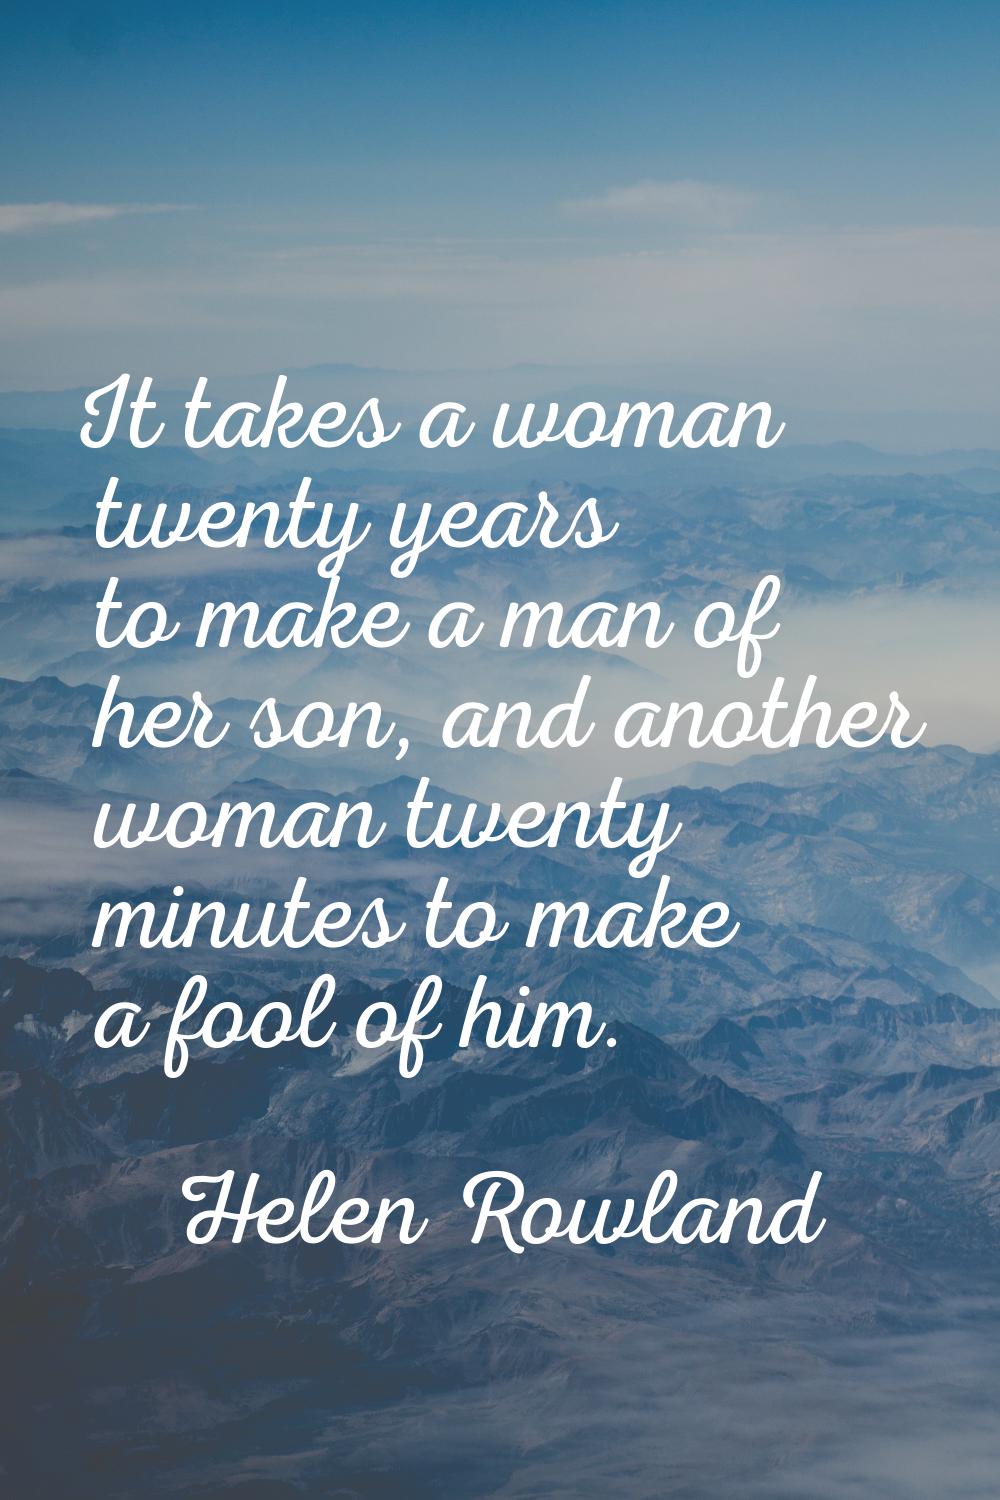 It takes a woman twenty years to make a man of her son, and another woman twenty minutes to make a 